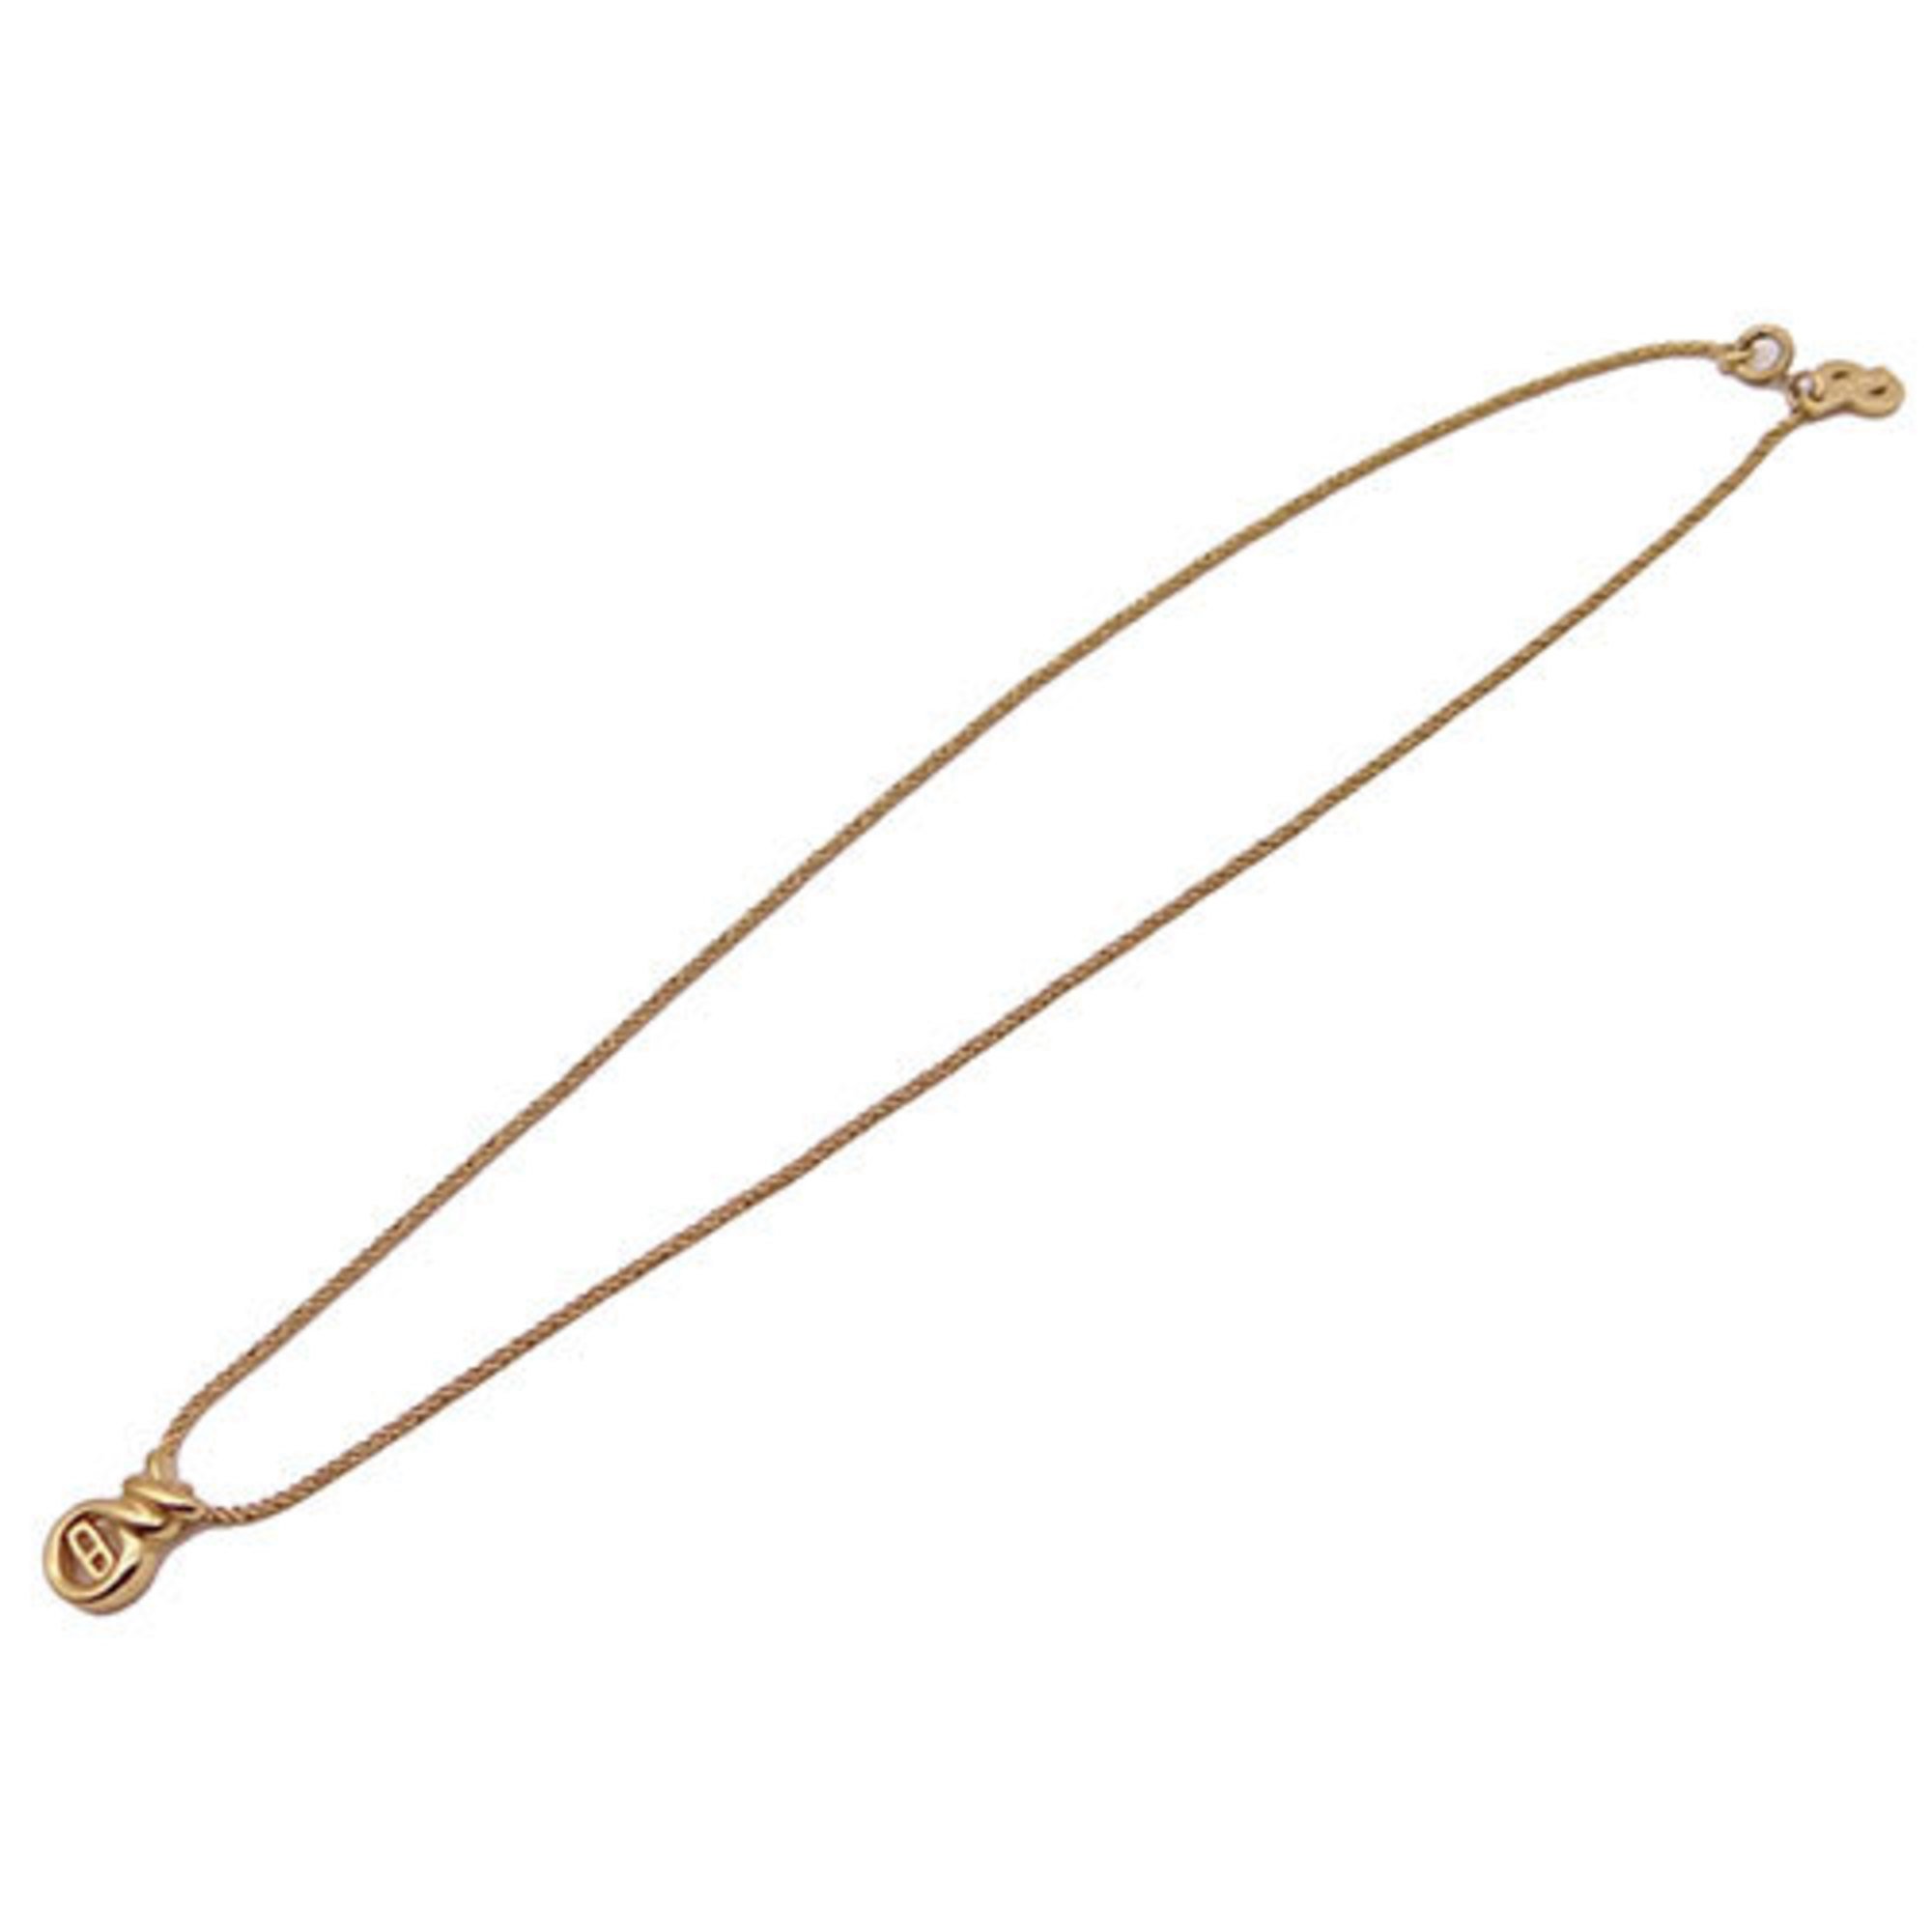 Christian Dior Necklace Women's Gold